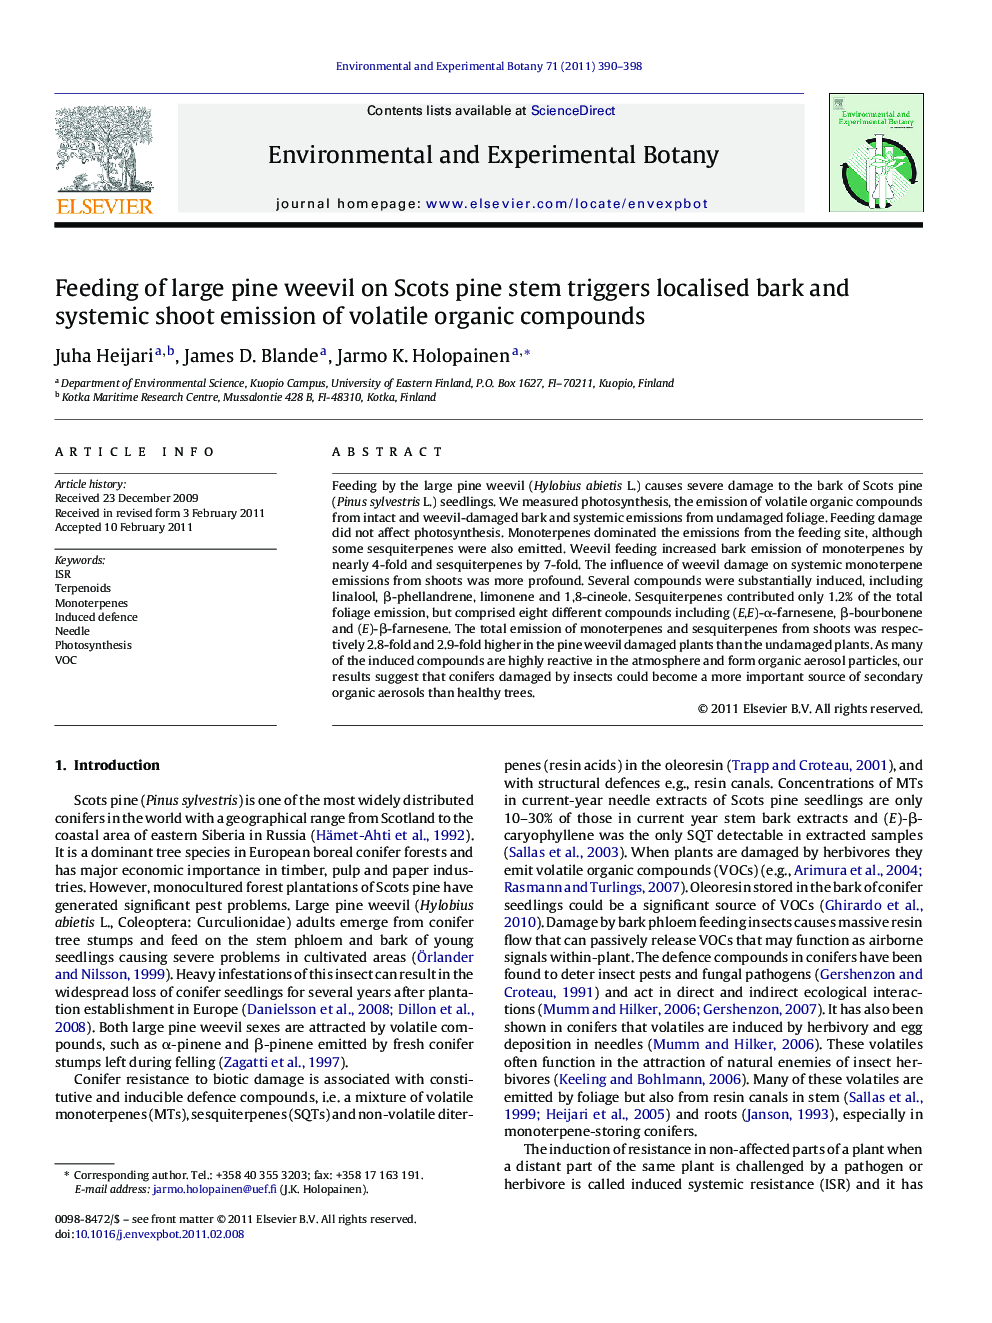 Feeding of large pine weevil on Scots pine stem triggers localised bark and systemic shoot emission of volatile organic compounds